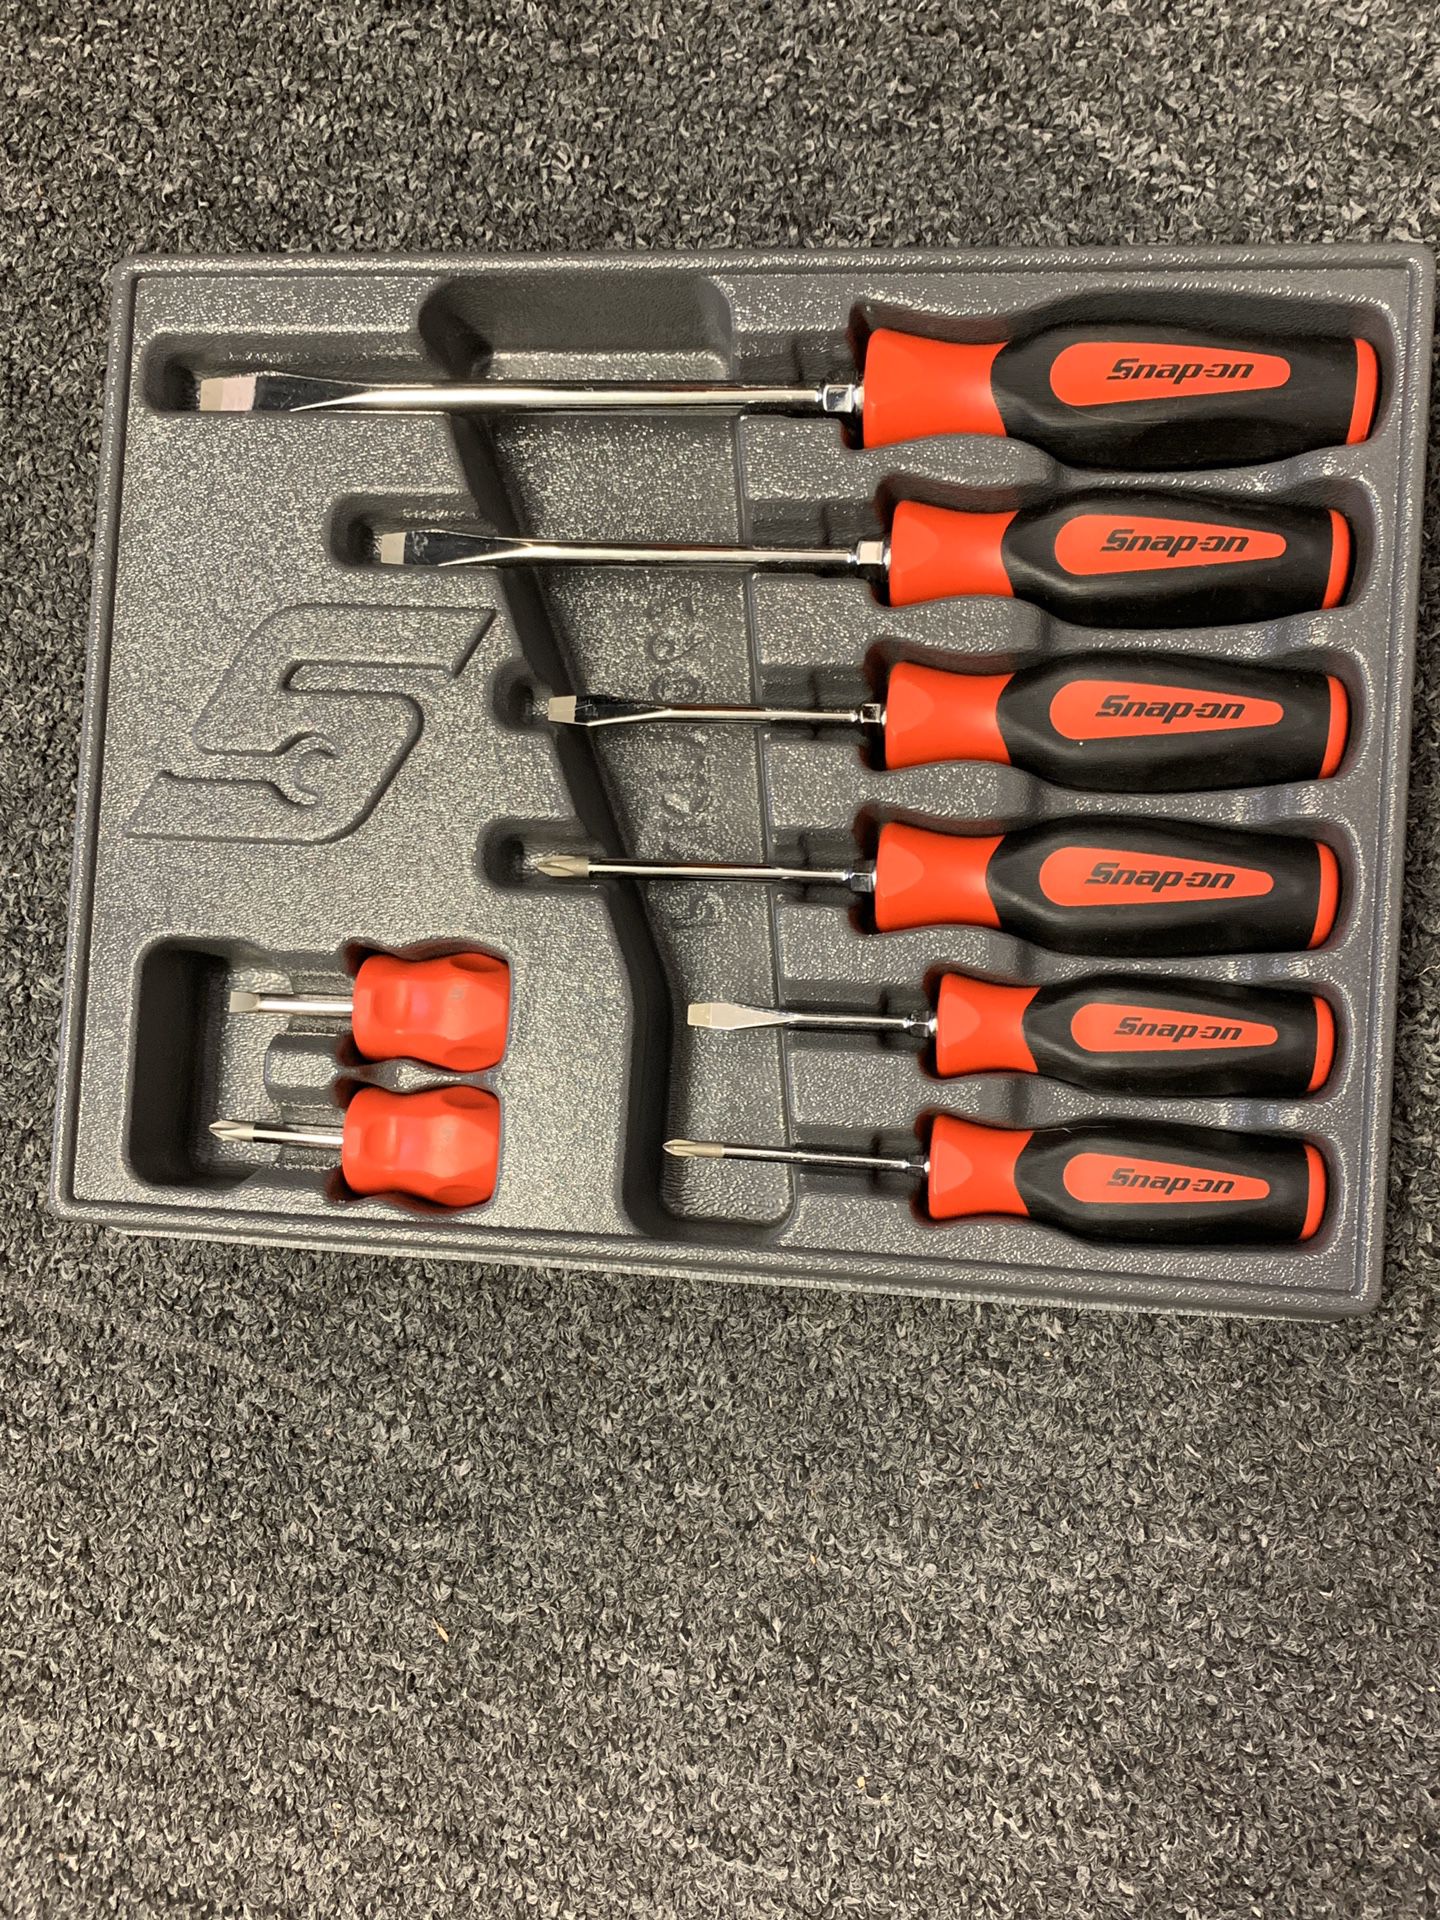 Snap On Tools - 8 piece soft grip screwdriver set “Red”